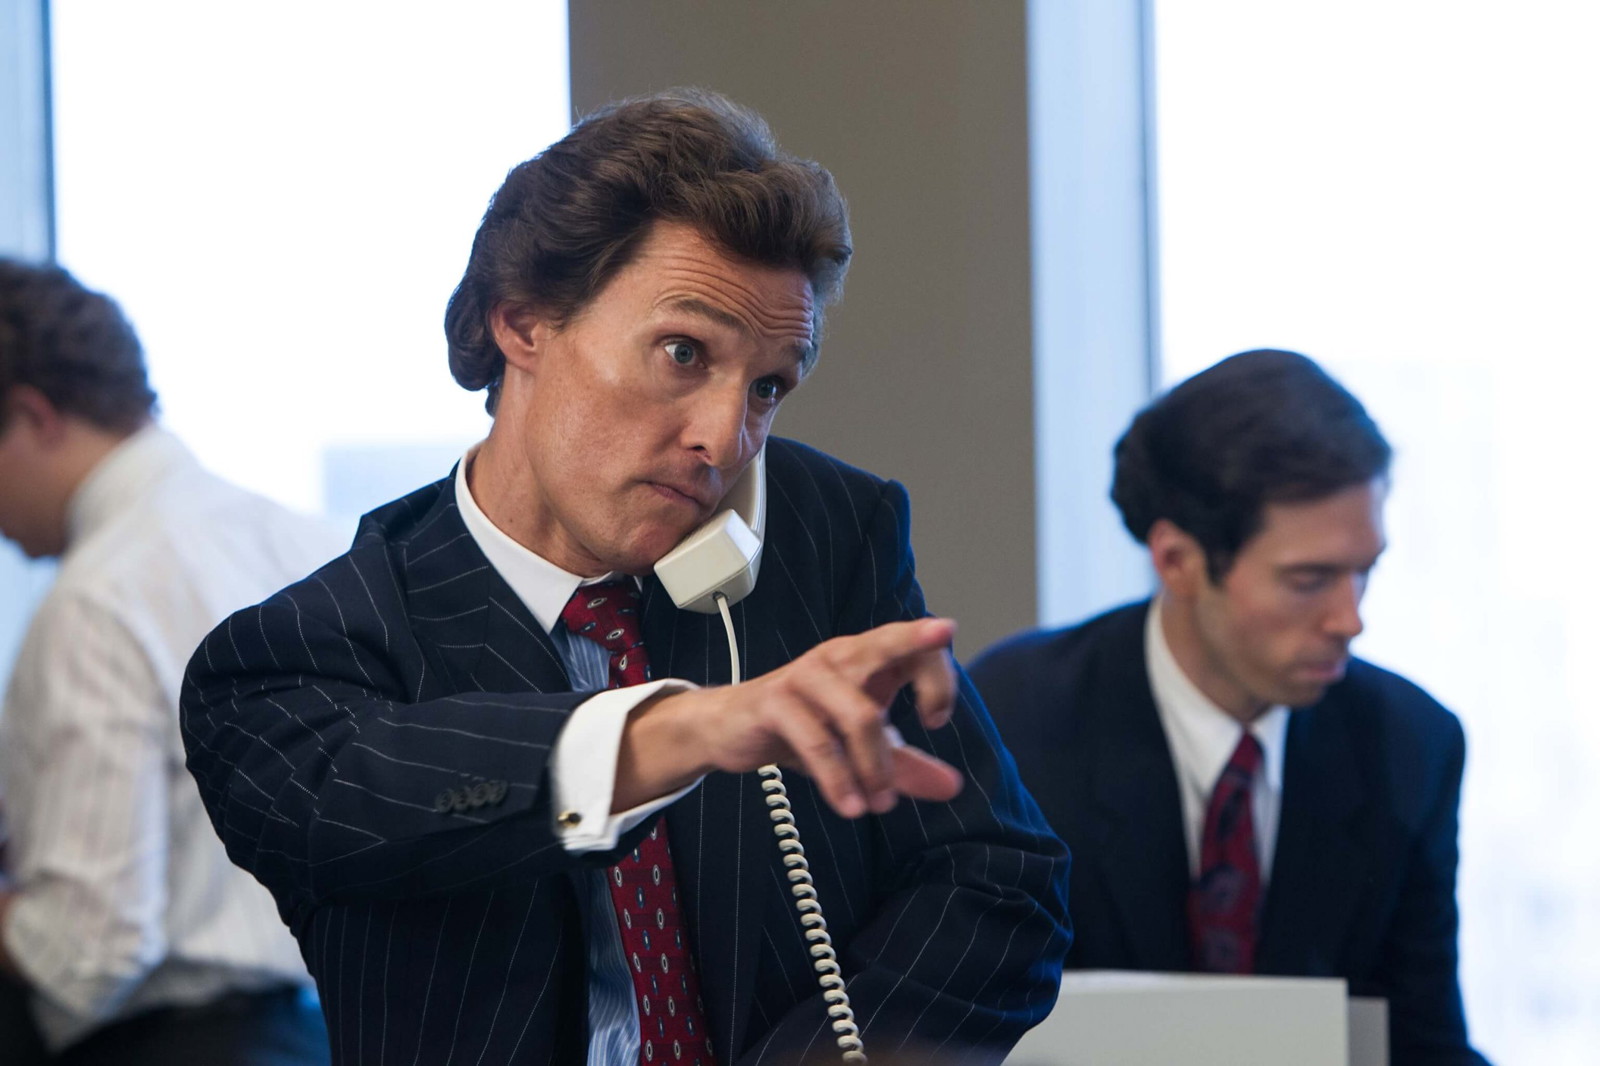 Matthew McConaughey in The Wolf of Wall Street. | Credit: Paramount Pictures.